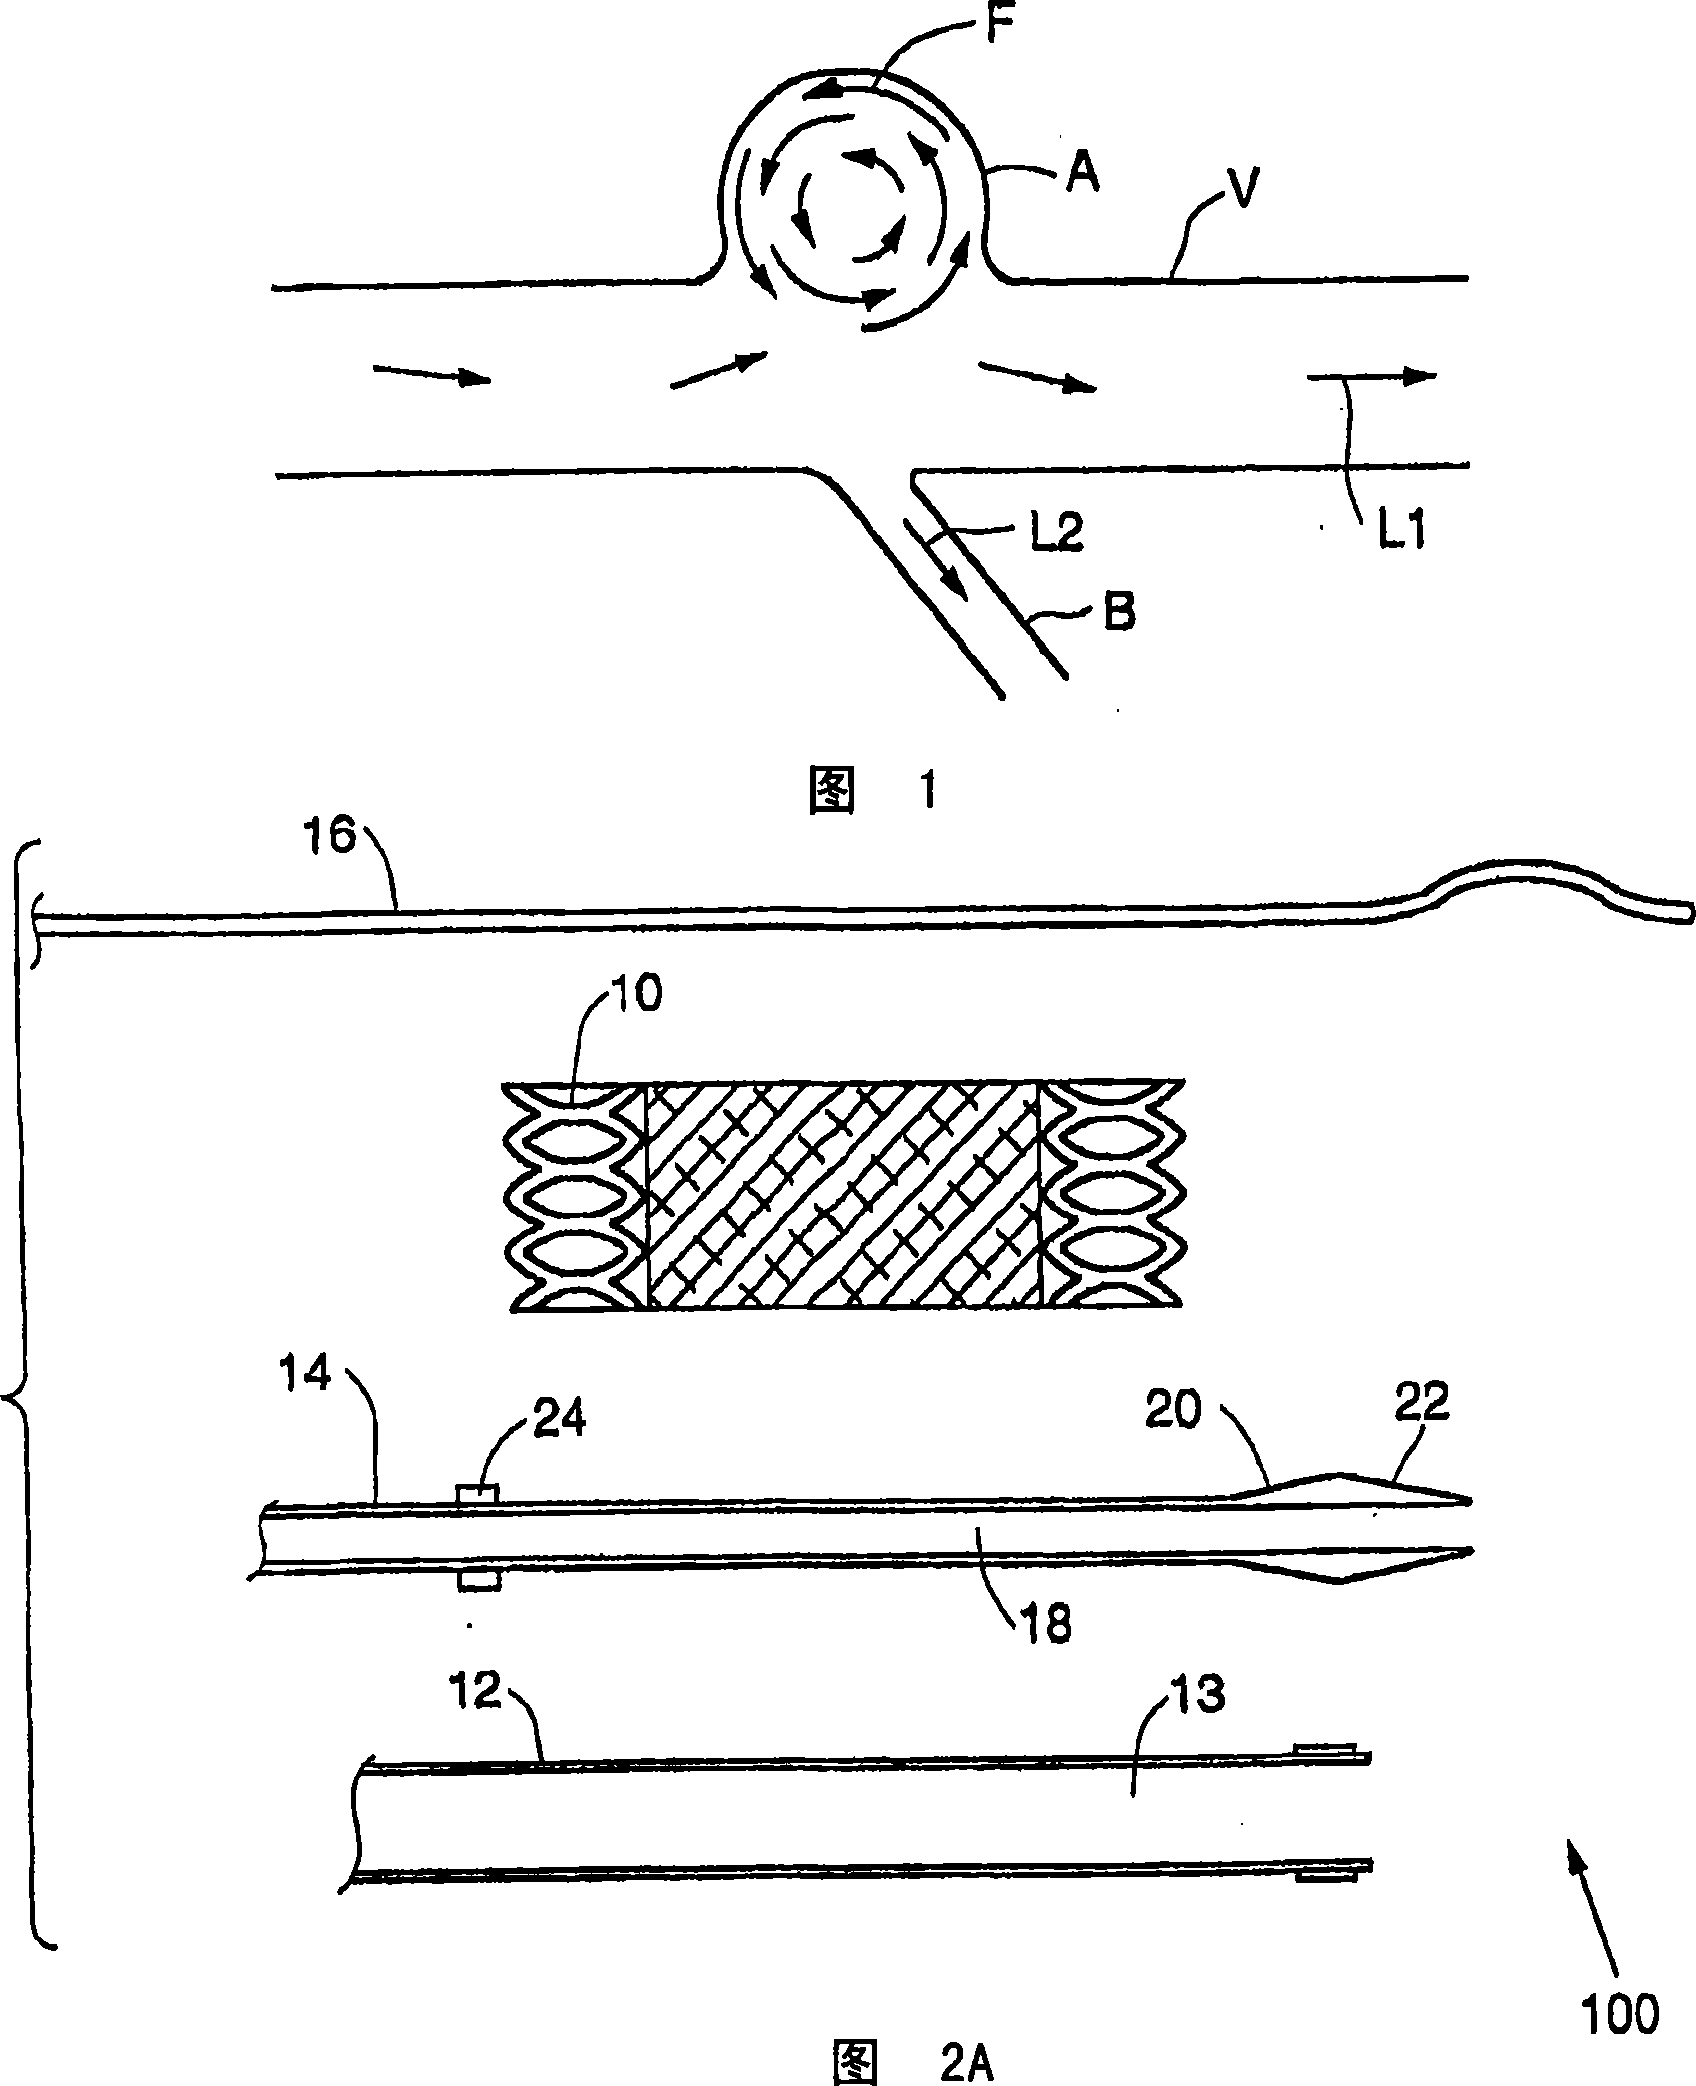 Aneurysm occlusion system and method